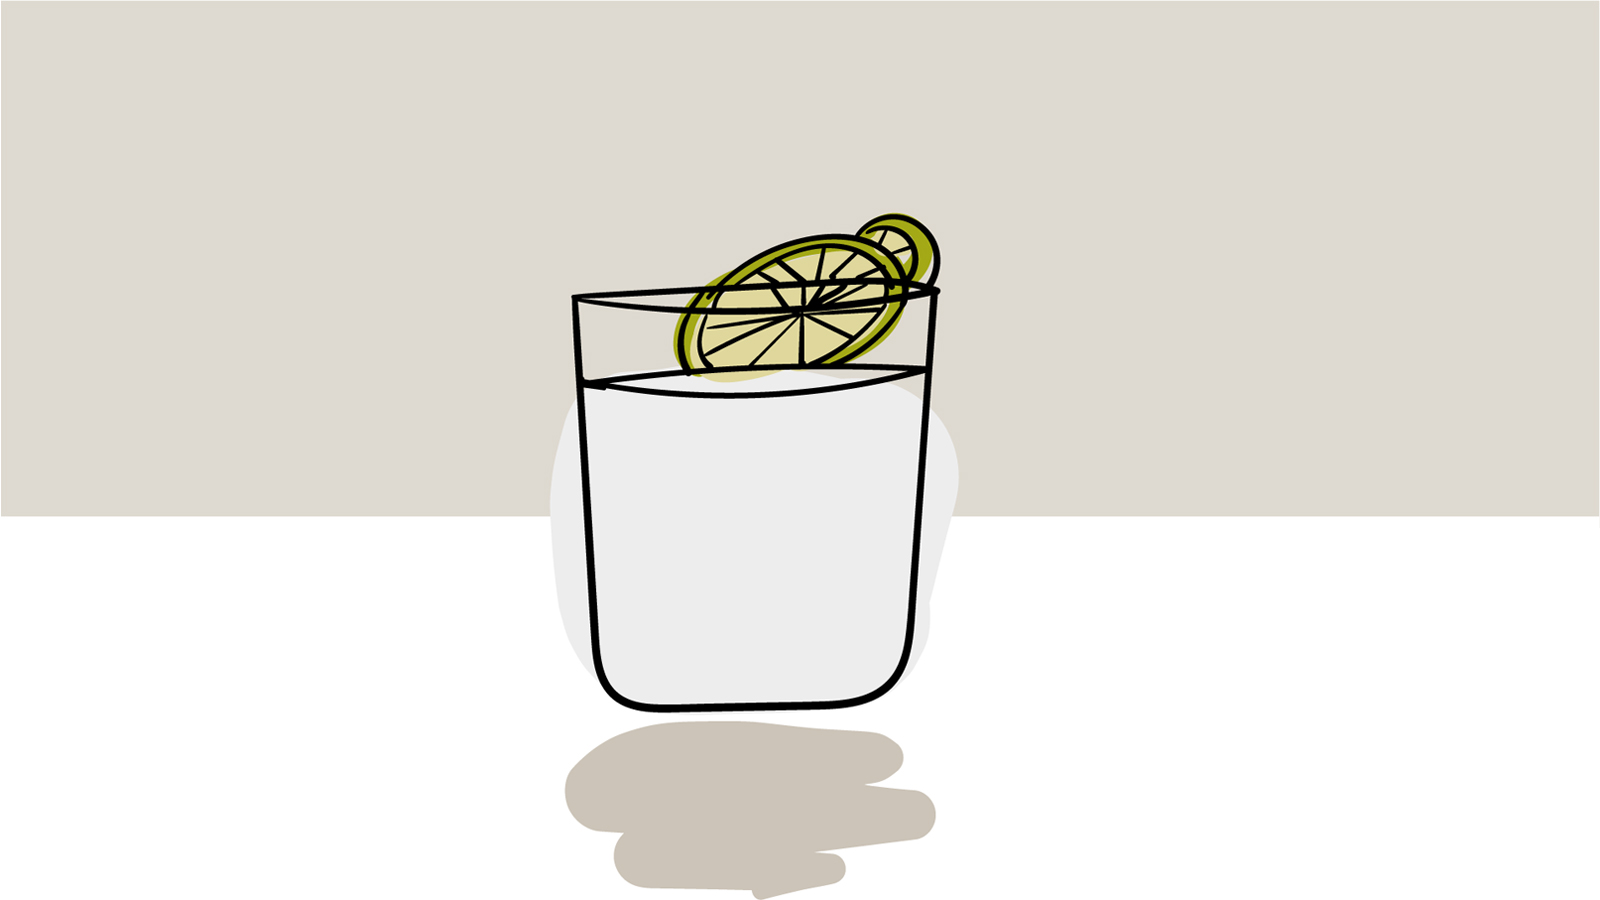 A Swedish Mule cocktail made of vodka, lime juice, syrup and ginger beer